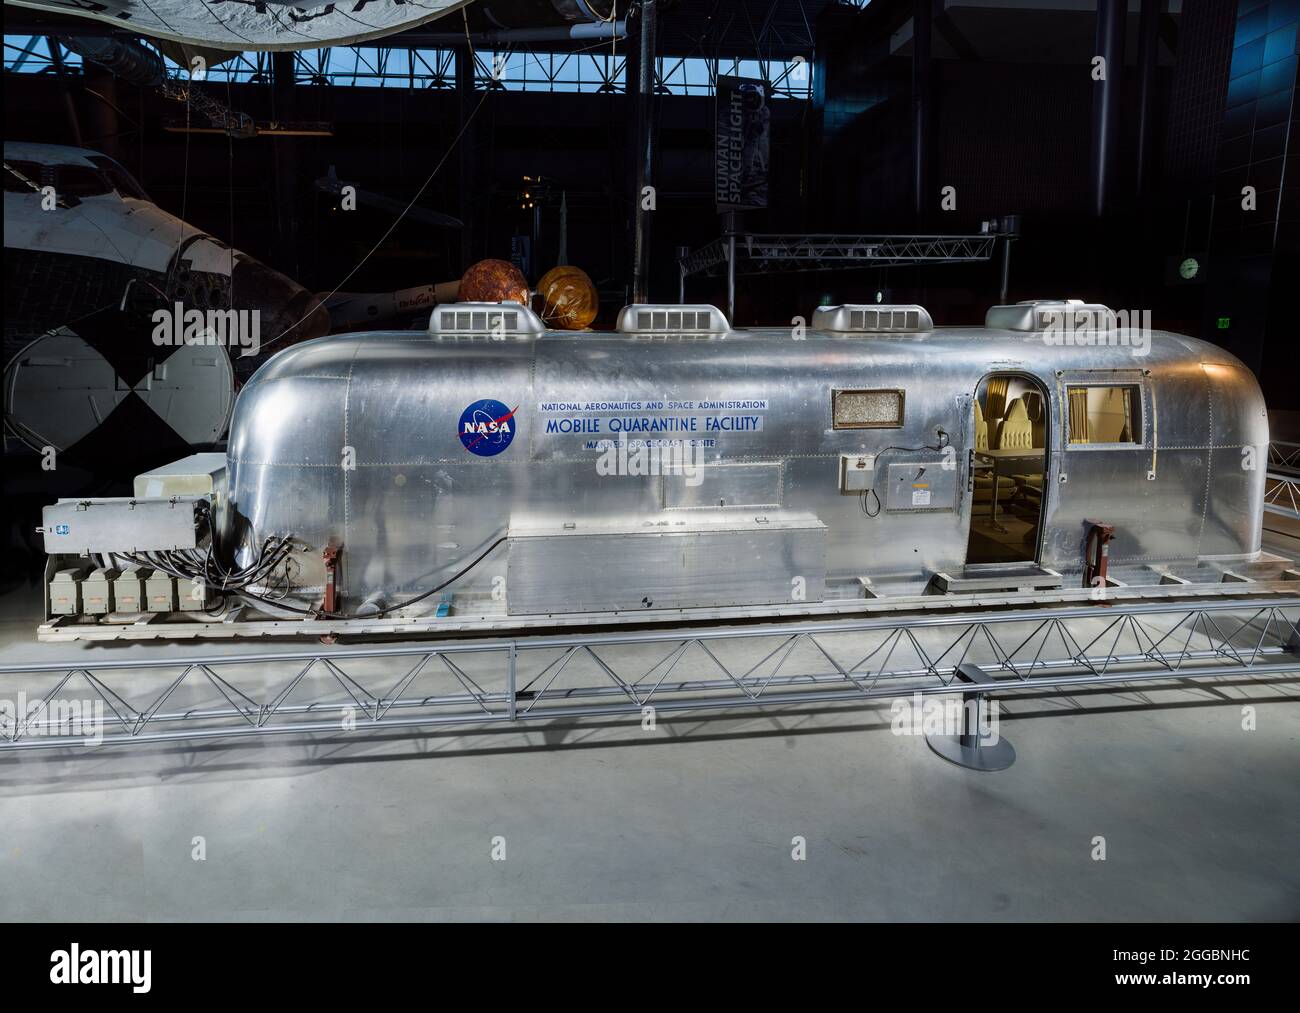 This Mobile Quarantine Facility (MQF) was one of four built by NASA for astronauts returning from the Moon. Its purpose was to prevent the unlikely spread of lunar contagions by isolating the astronauts from contact with other people. A converted Airstream trailer, the MQF contained living and sleeping quarters, a kitchen, and a bathroom. Quarantine was assured by keeping the air pressure inside lower than the pressure outside and by filtering the air vented from the facility. This MQF was used by Apollo 11 astronauts Armstrong, Aldrin, and Collins immediately after their return to Earth. Stock Photo